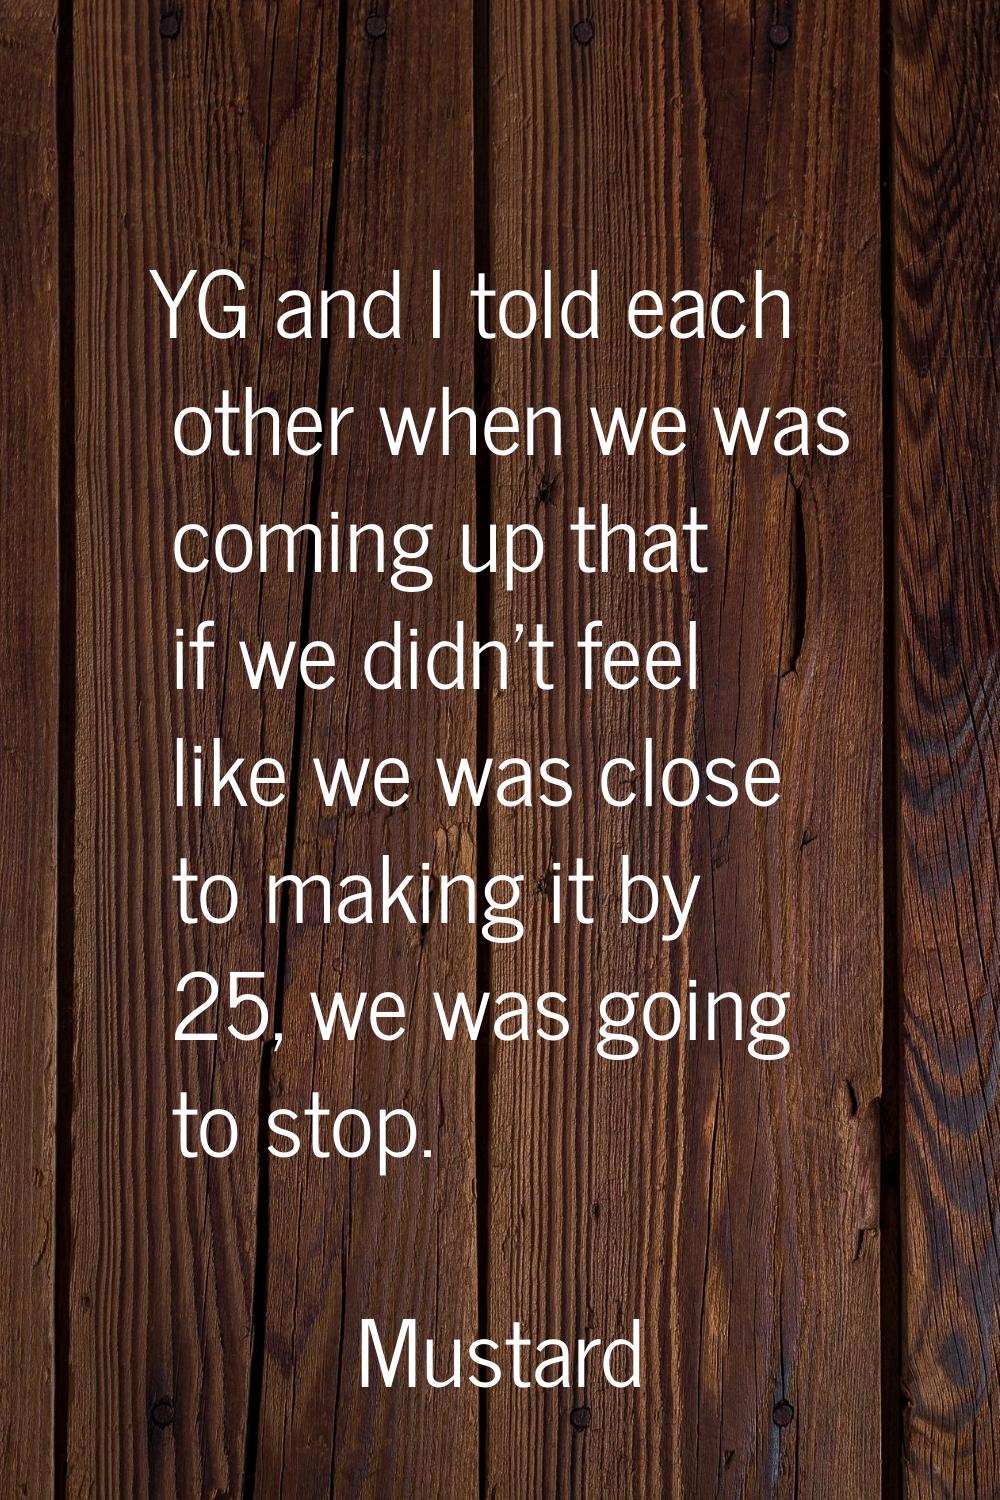 YG and I told each other when we was coming up that if we didn't feel like we was close to making i